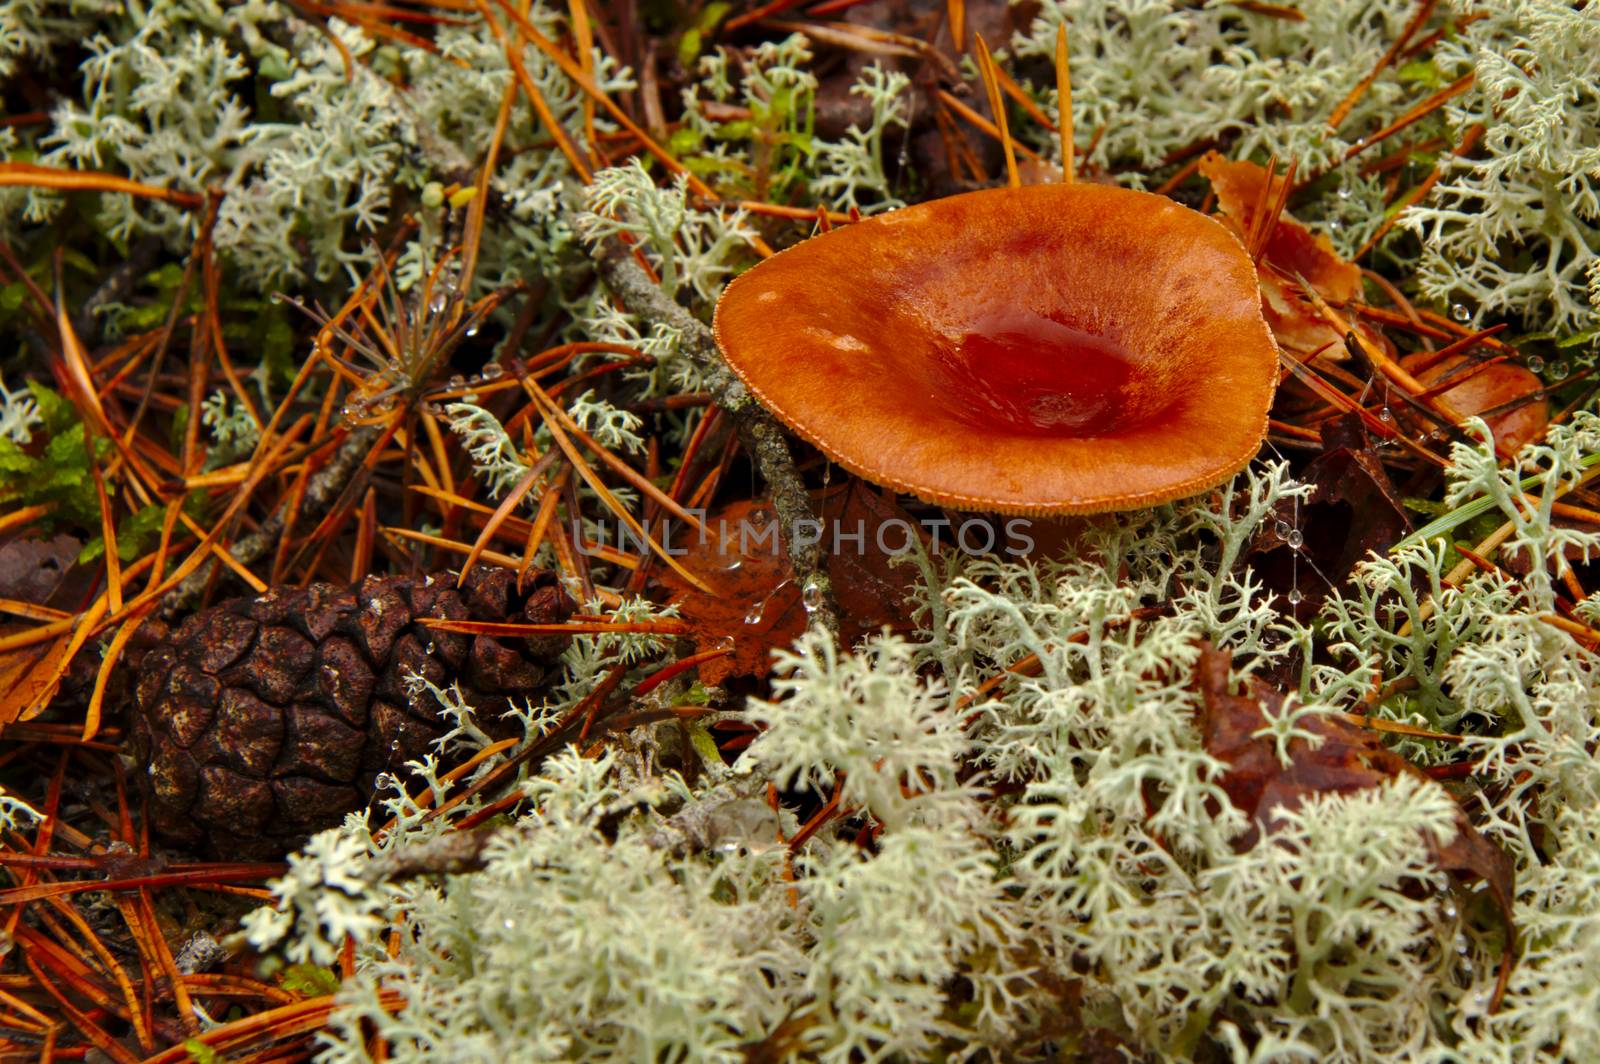 Lactarius rufus in the forest surrounded with lichens.